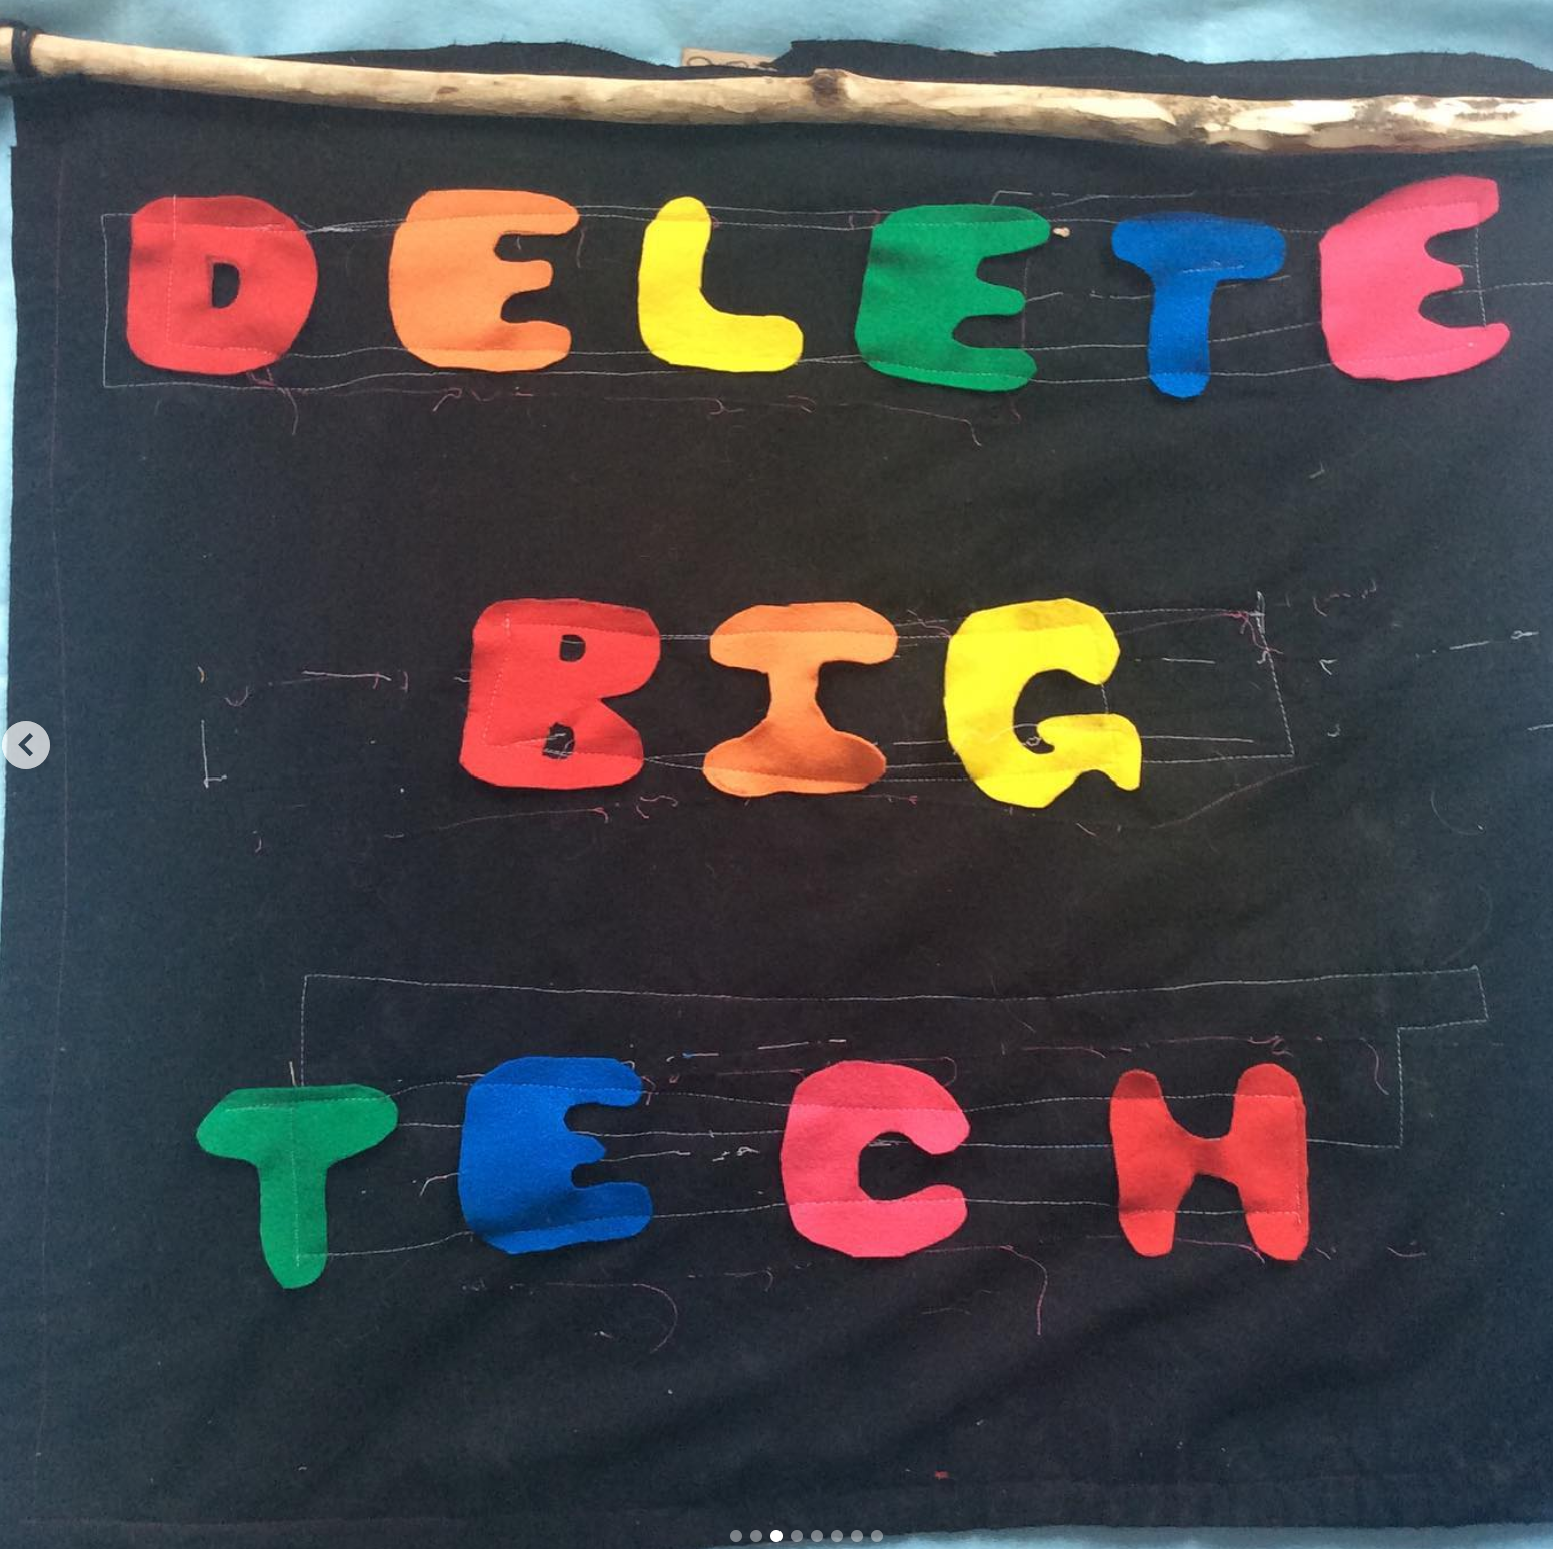 delete big tech flag with rounded letters